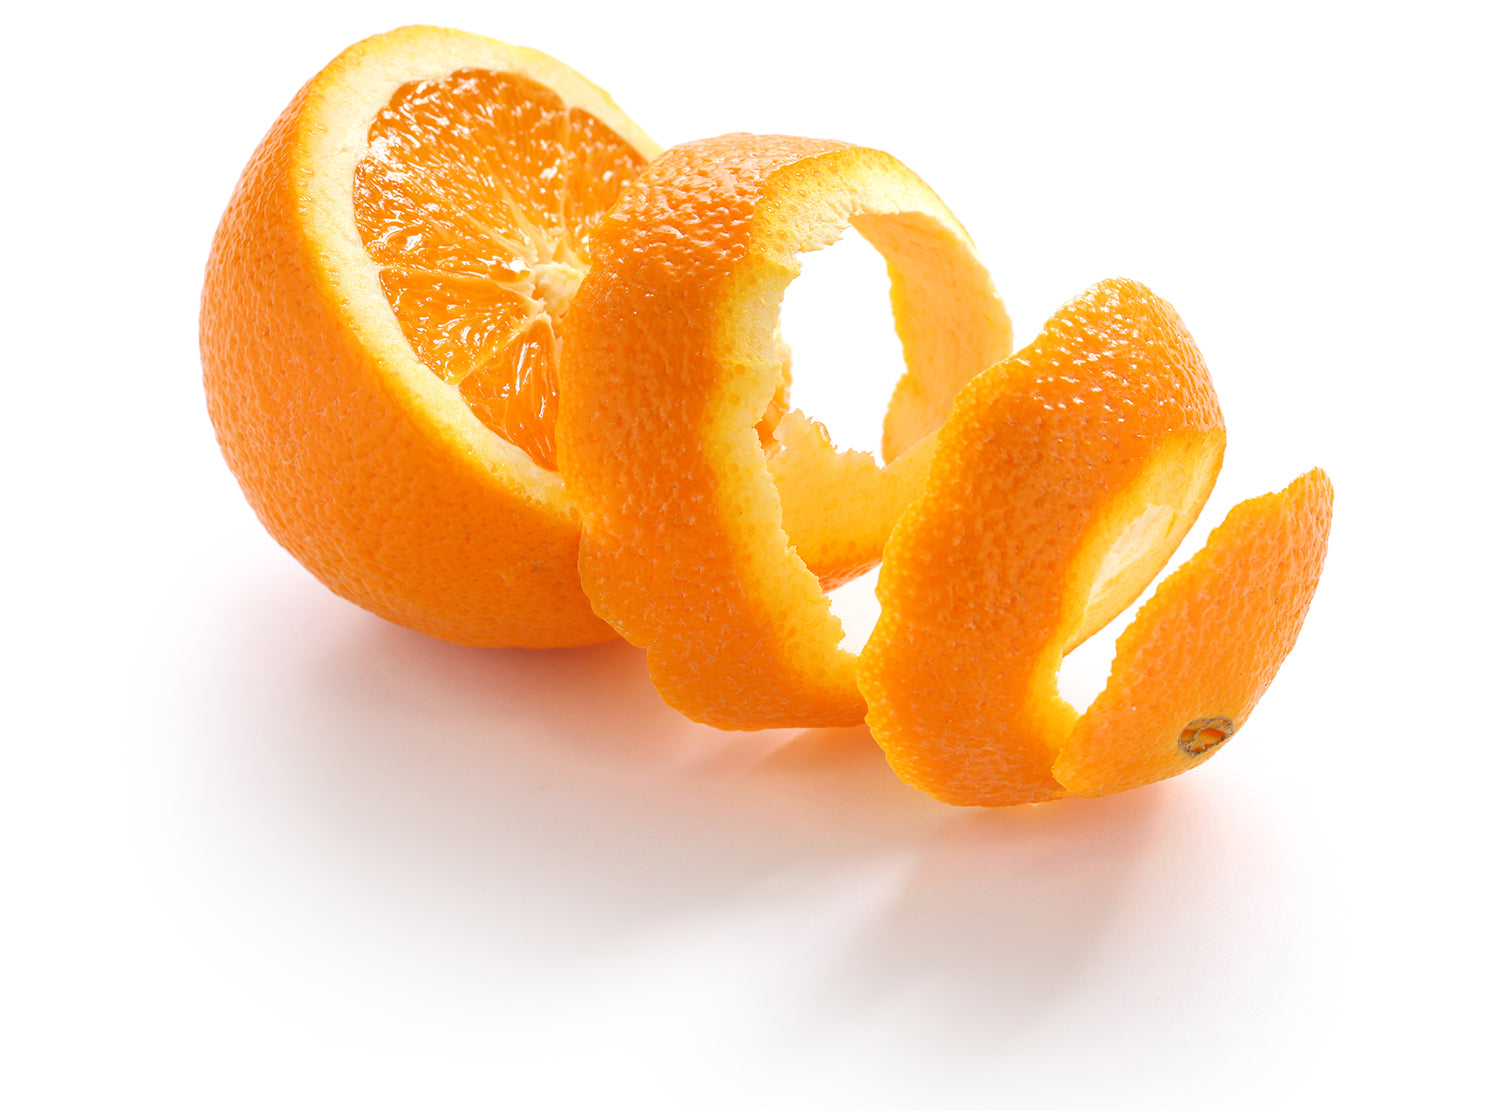 How To Peel an Orange, Quick and Easy